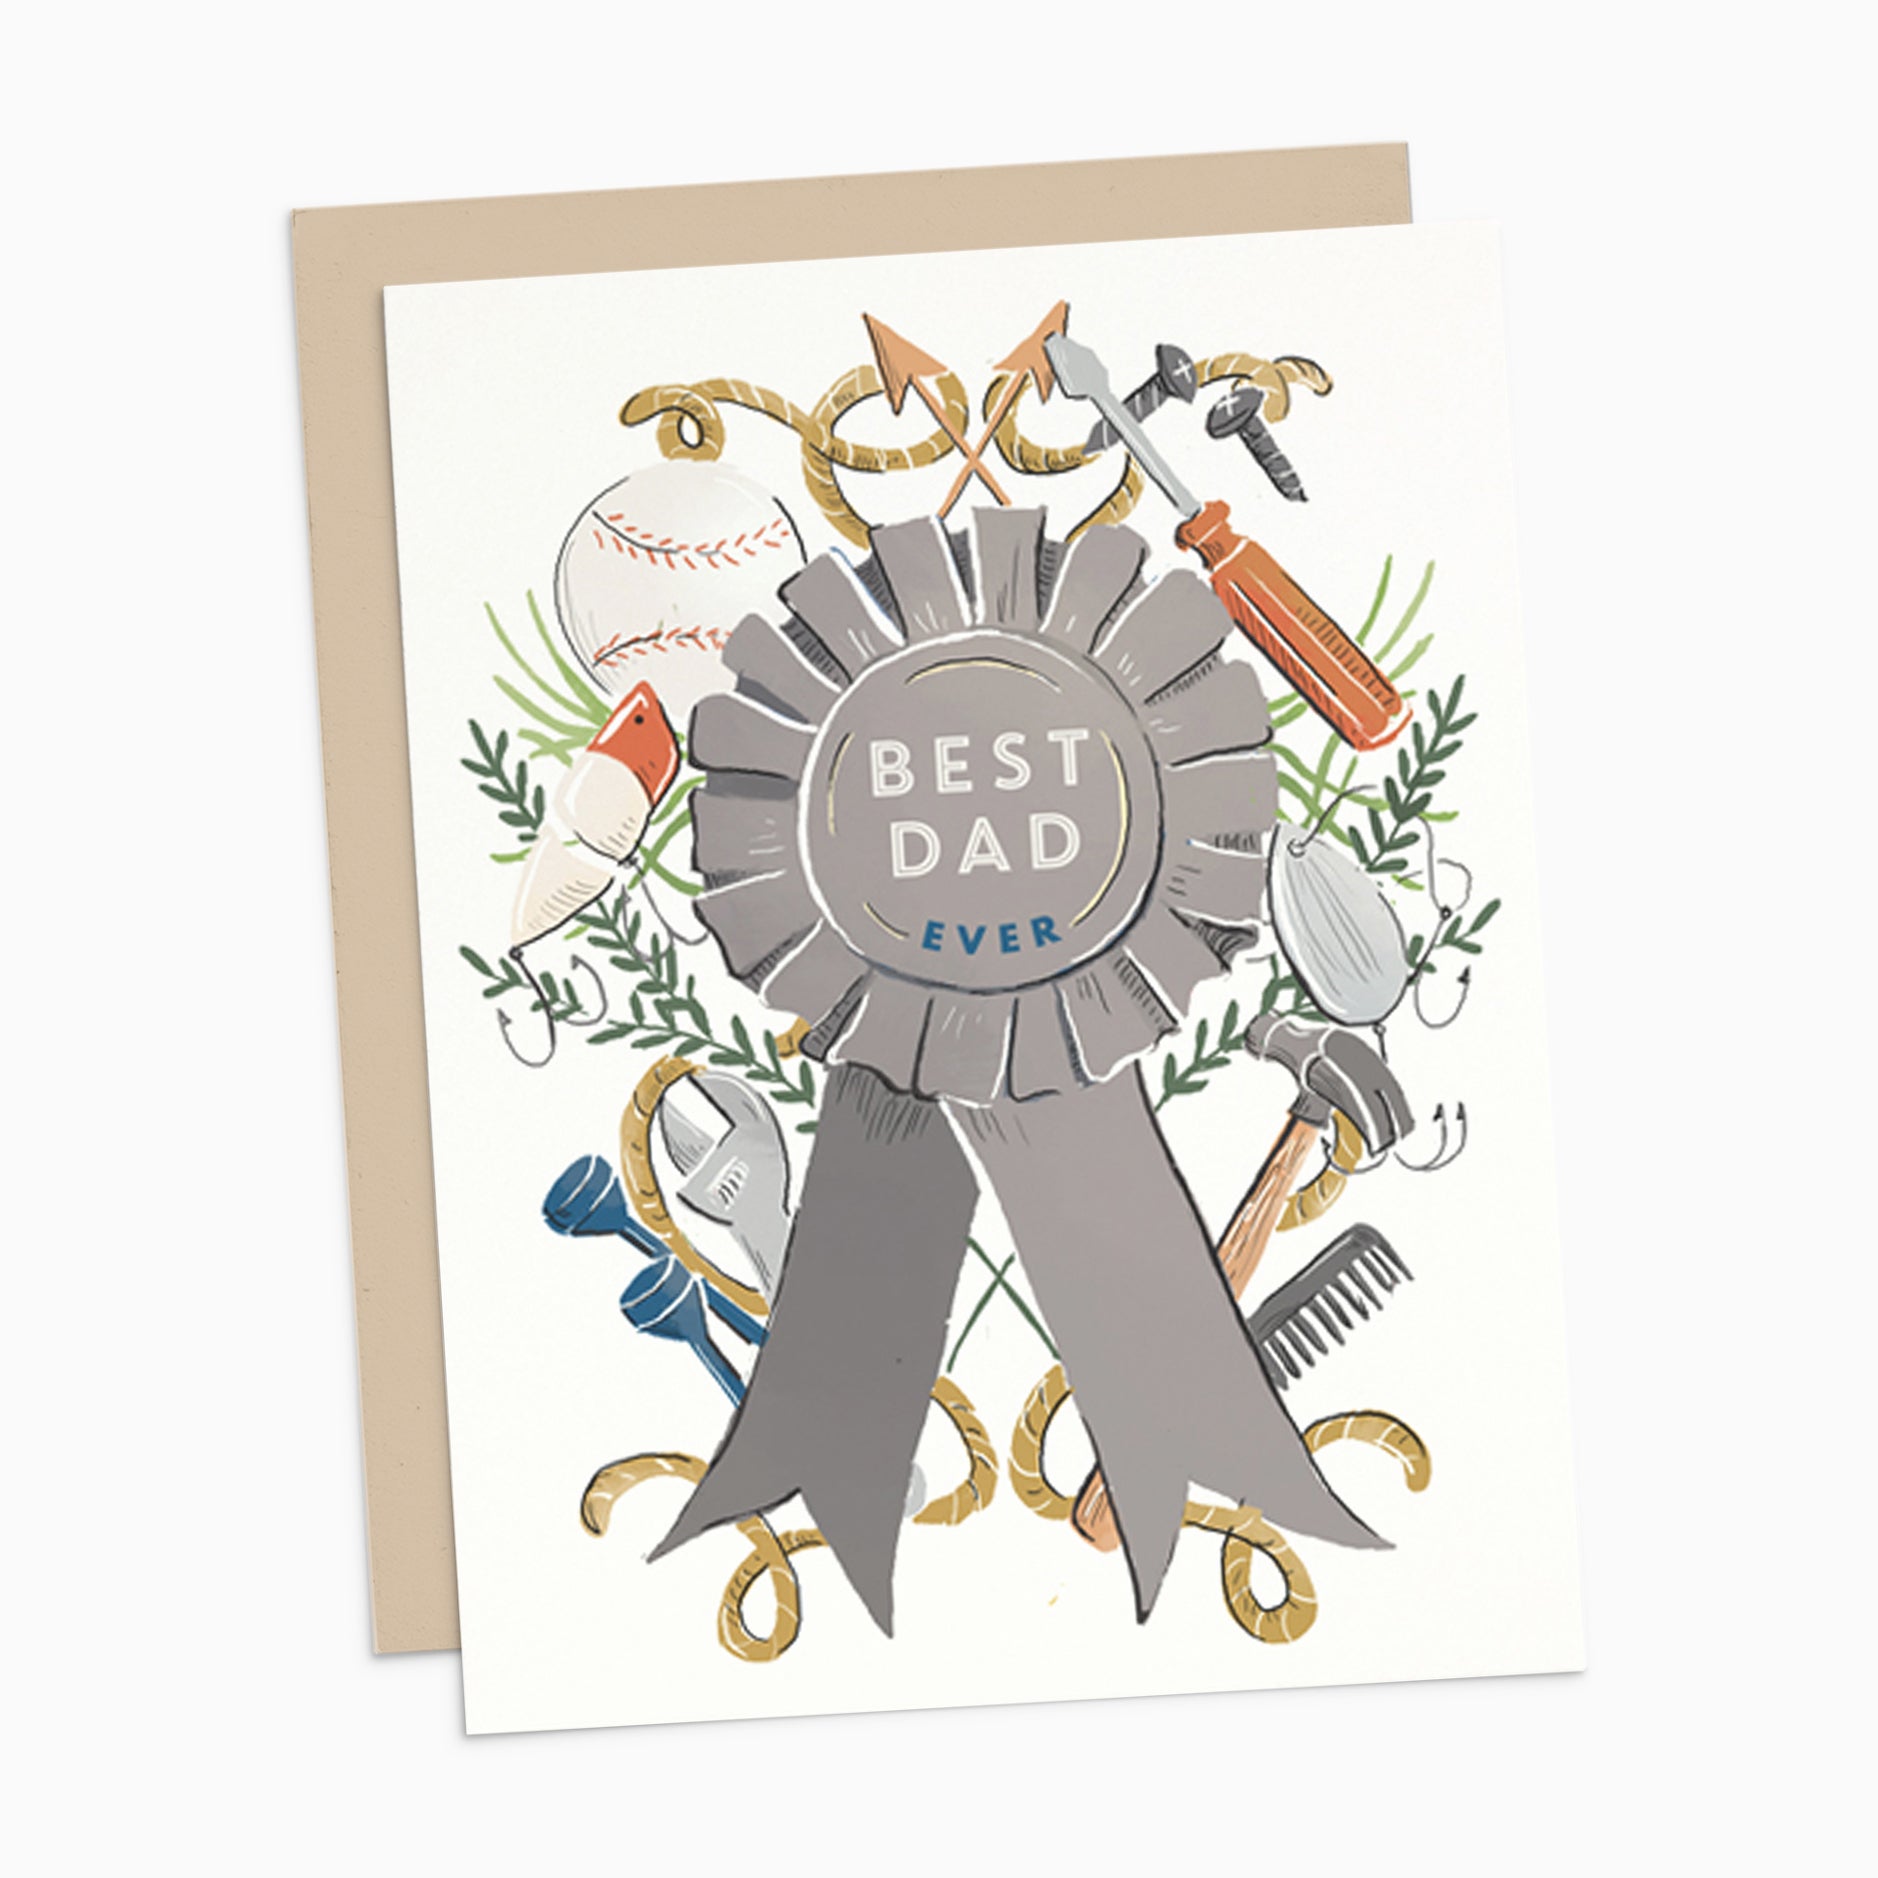 Illustrated Father's Day card on warm white premium cardstock, featuring an award ribbon that reads 'Best Dad Ever,' accented with illustrations of baseballs, tools, and other dad-associated items.